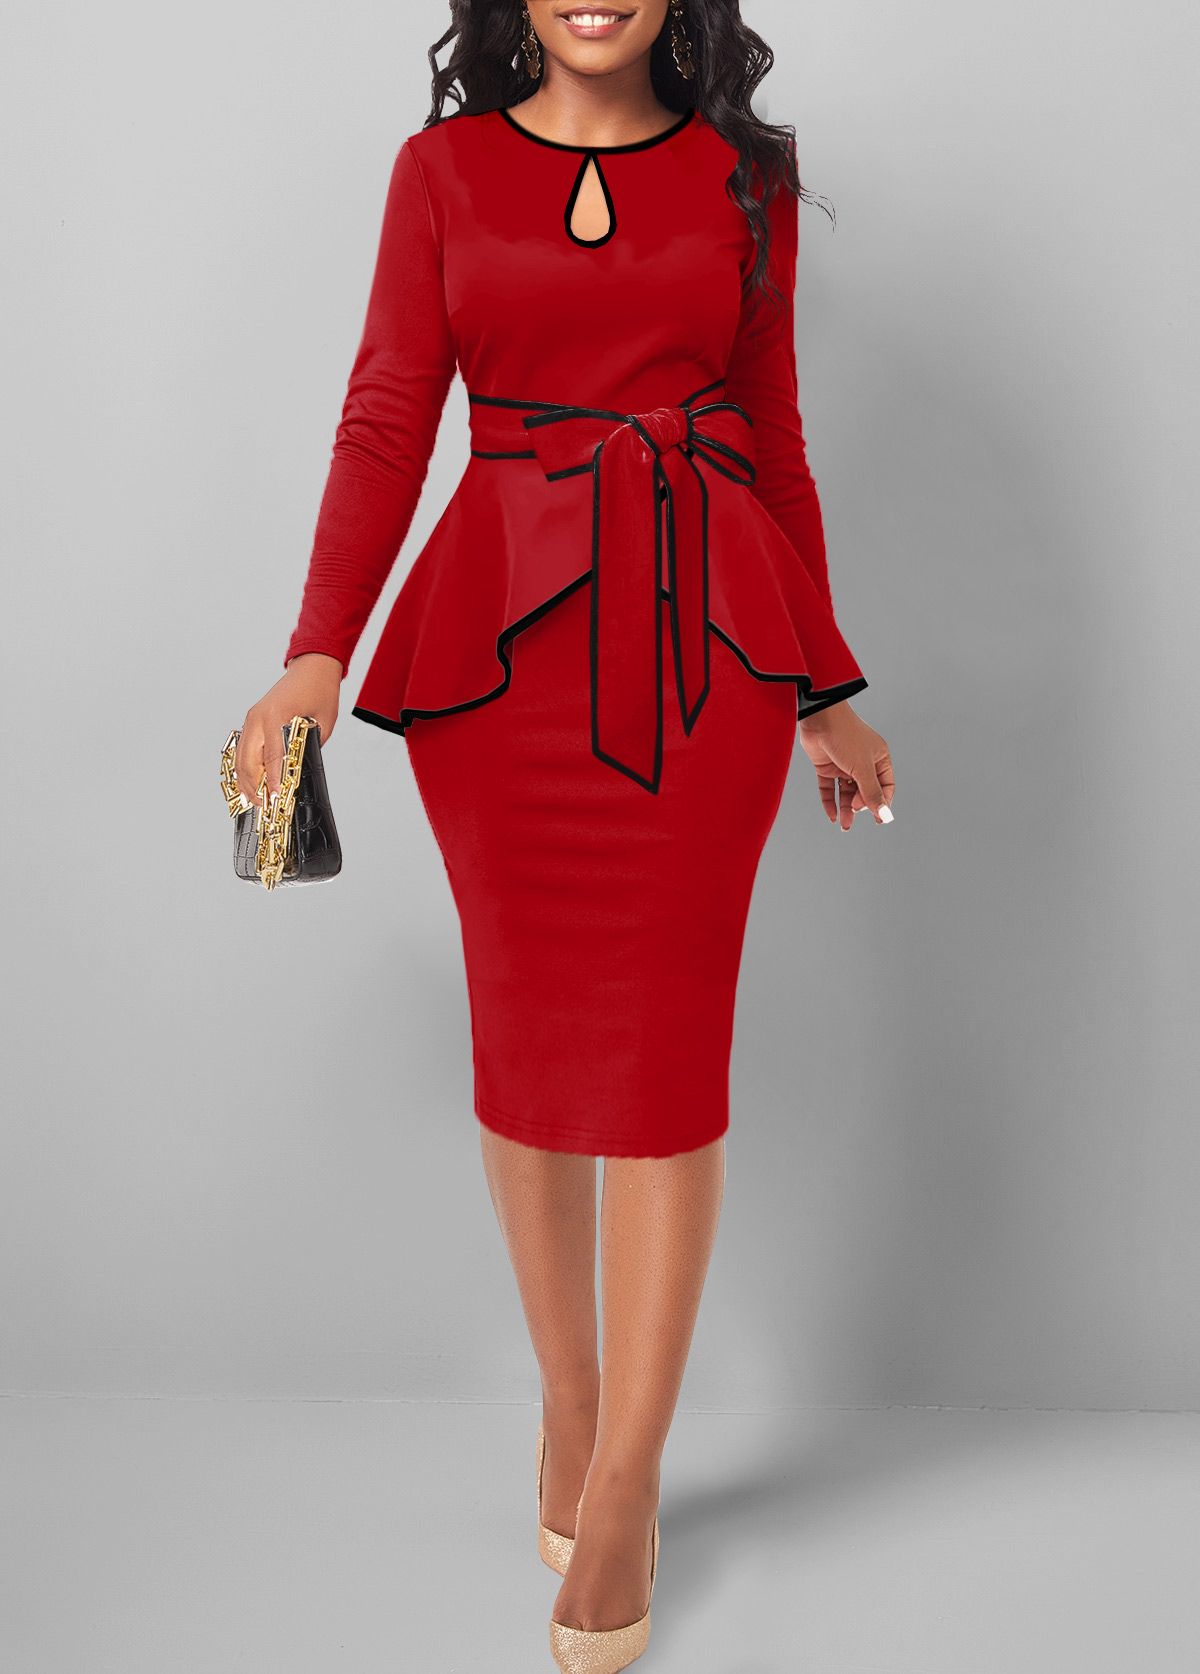 ROTITA Contrast Binding Red Belted Round Neck Bodycon Dress